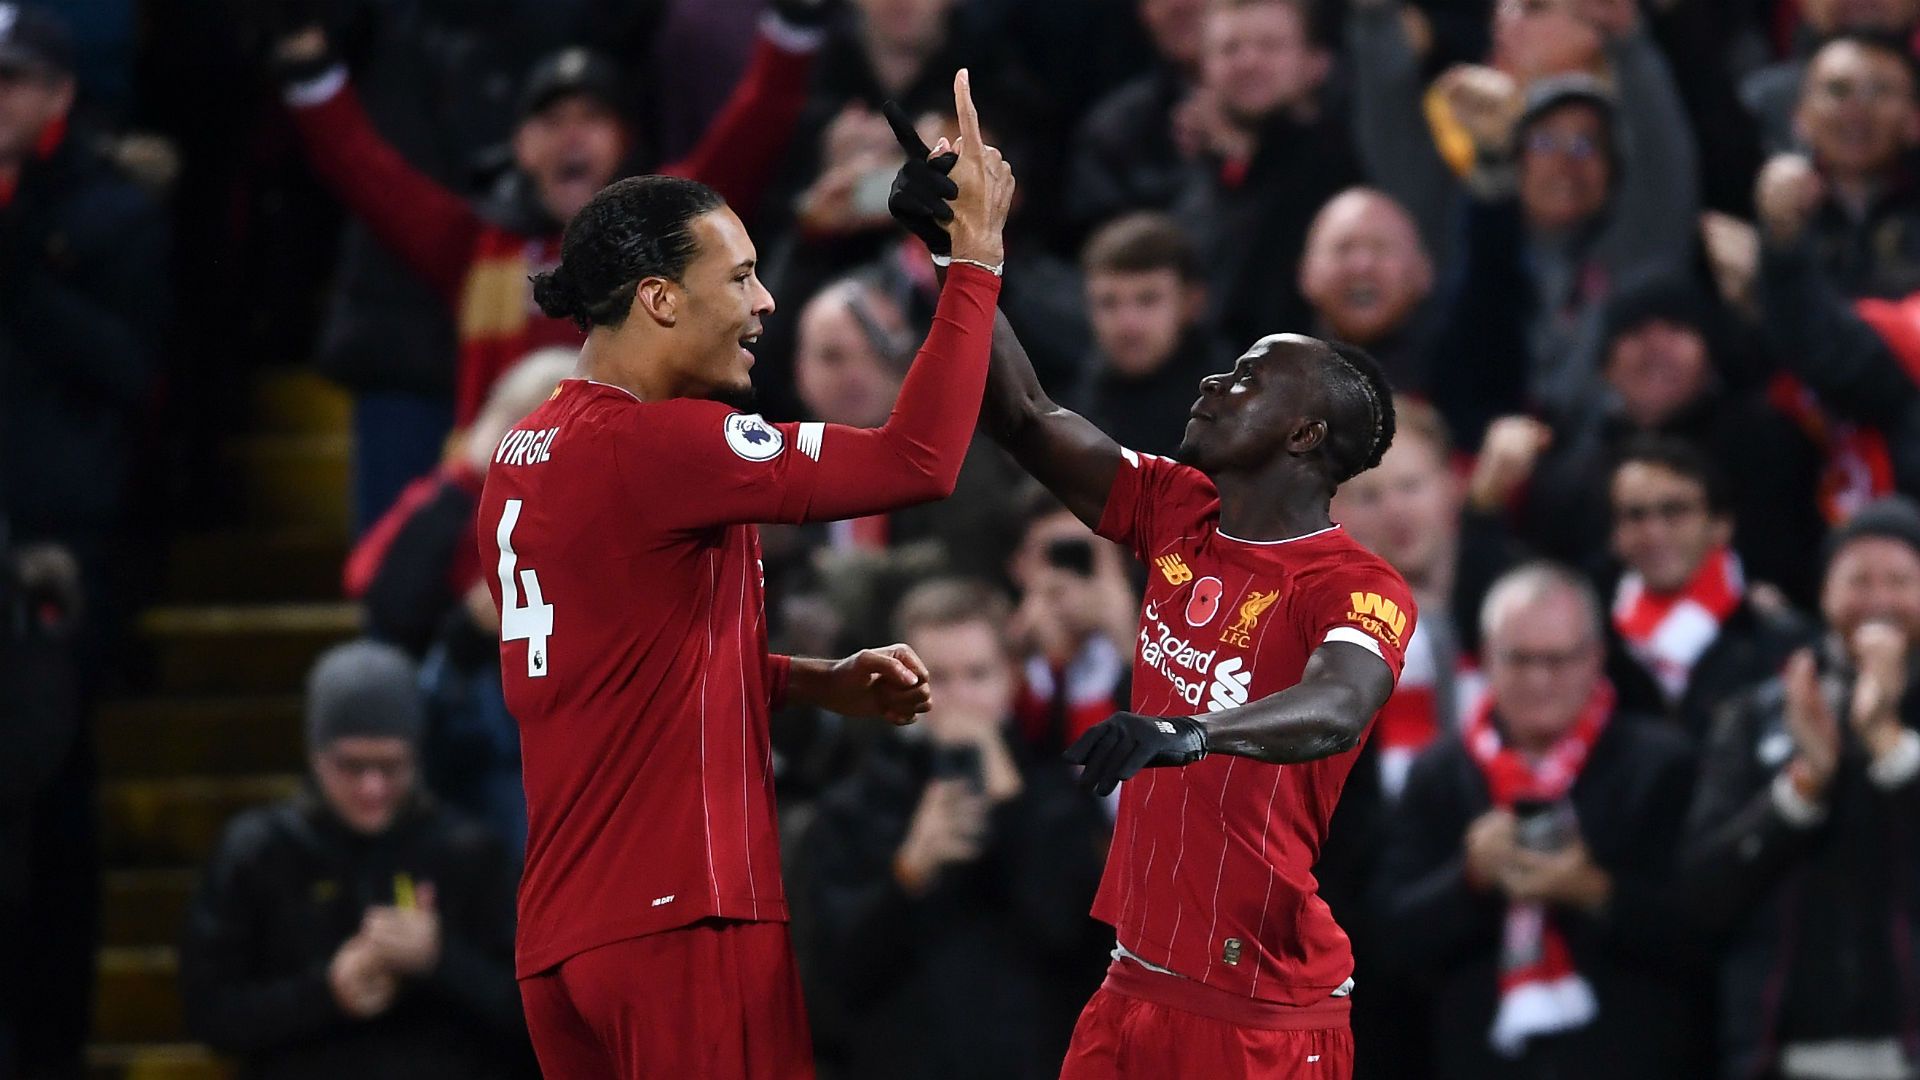 Liverpool are one of the best teams in Premier League history